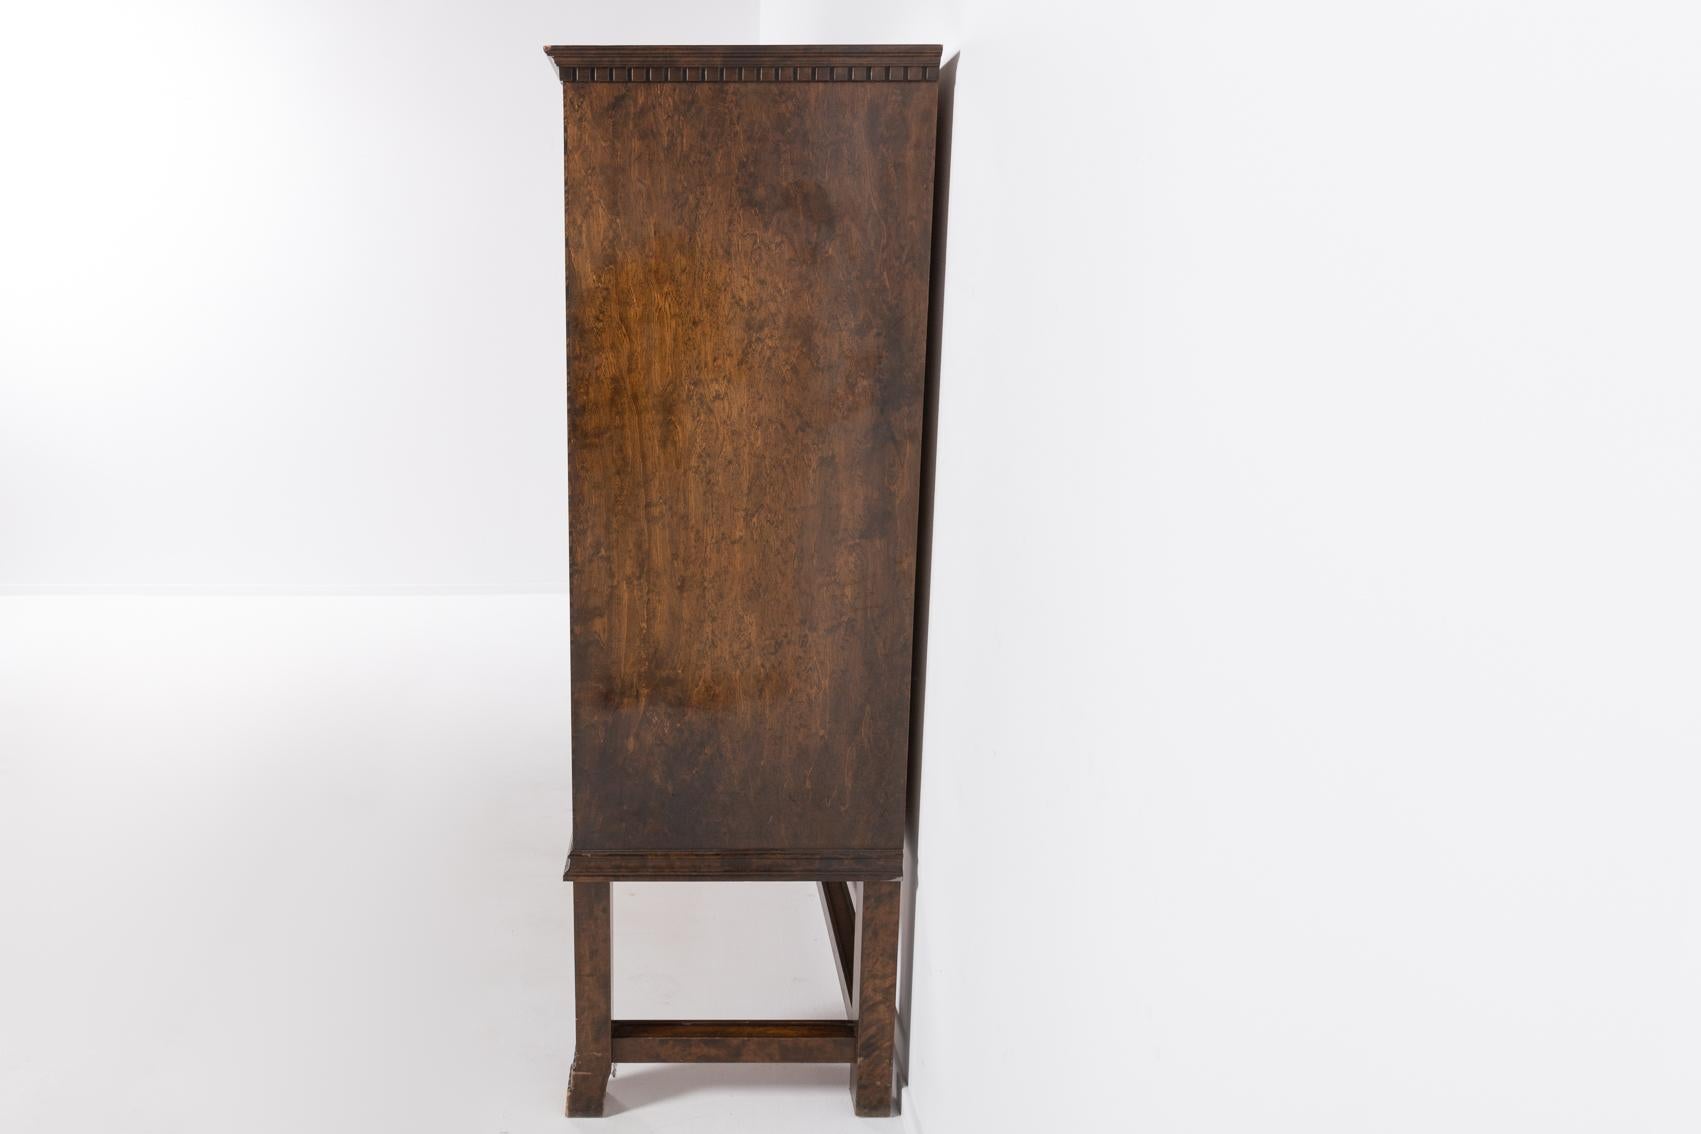 Birch ‘Roma’ cabinet by Axel Einar Hjorth for Bodafors, 1920s For Sale